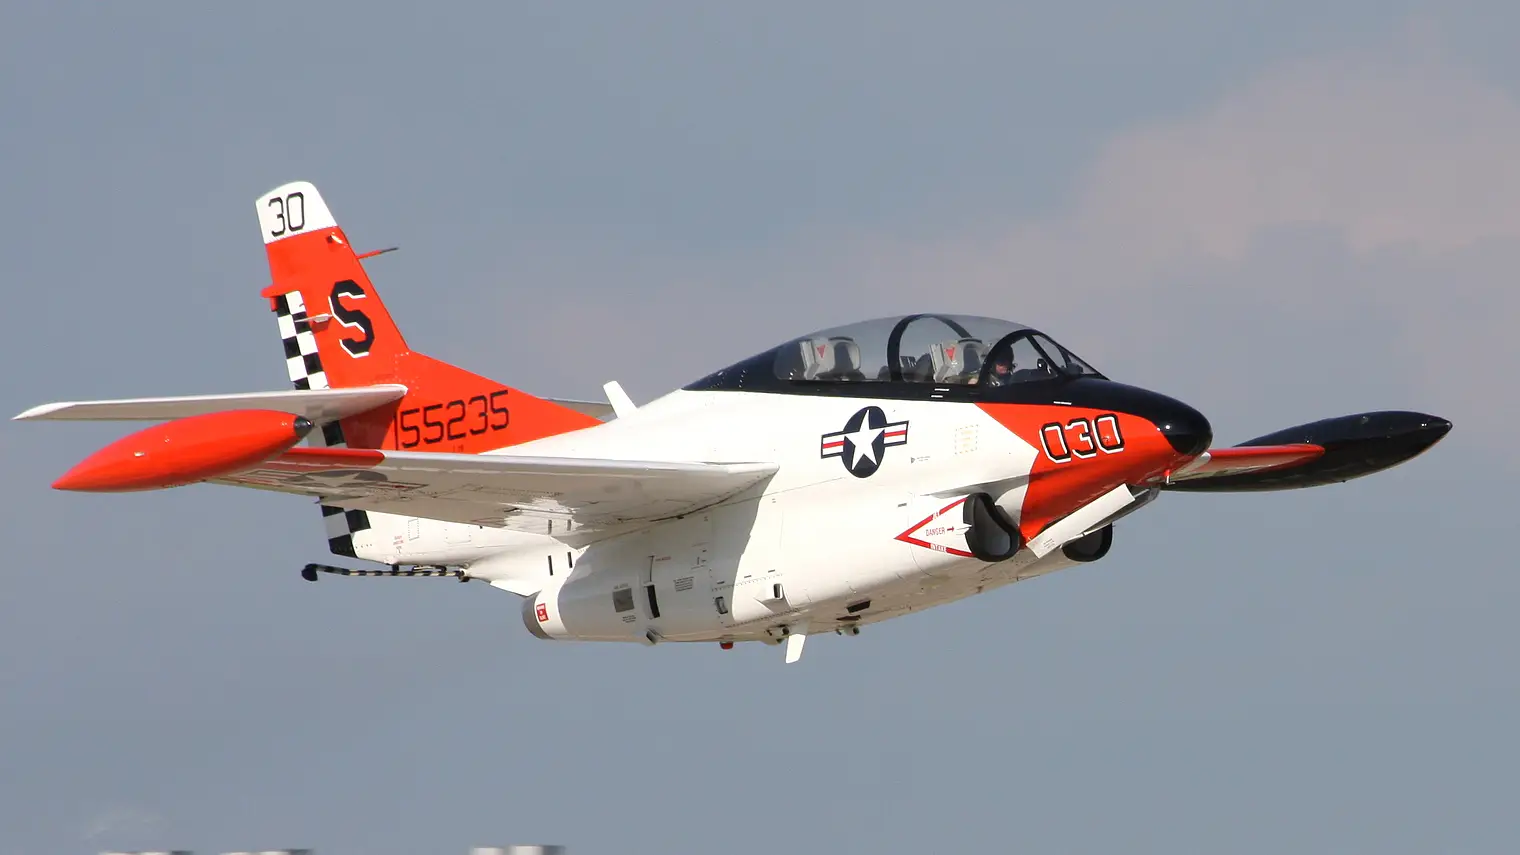 Former U.S. Marine Corps pilot wanted to sell T-2 Buckeye to China